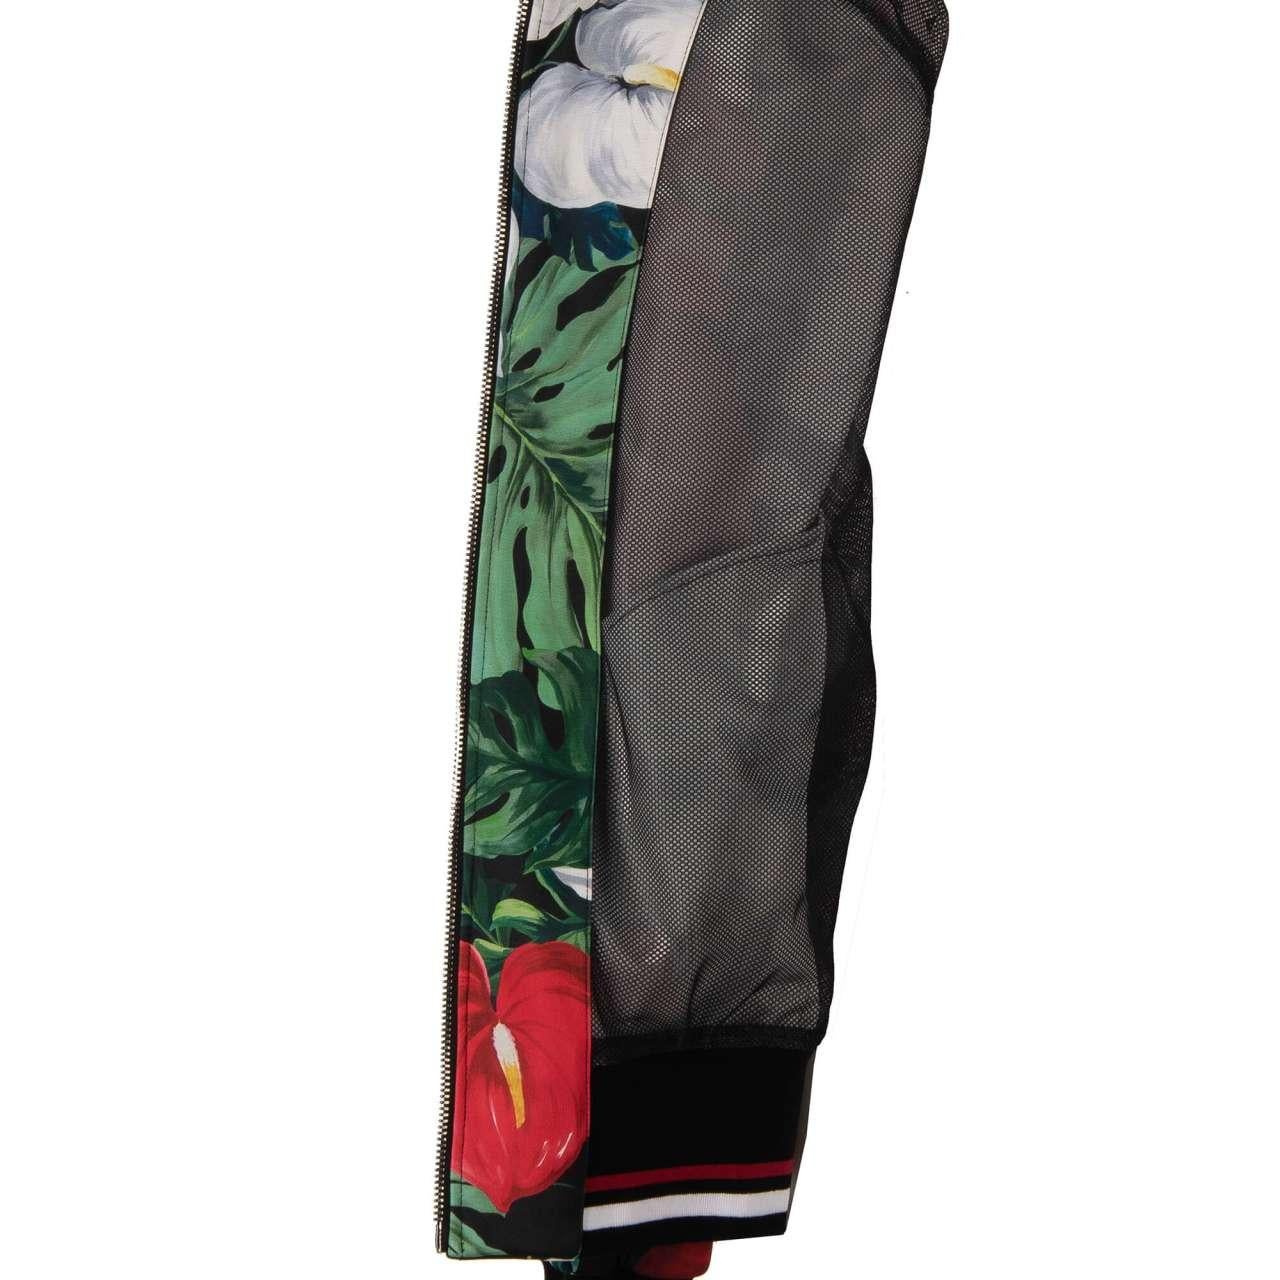 Dolce & Gabbana Floral Printed Track Jacket with Knit Details and Pockets 50 M-L 4